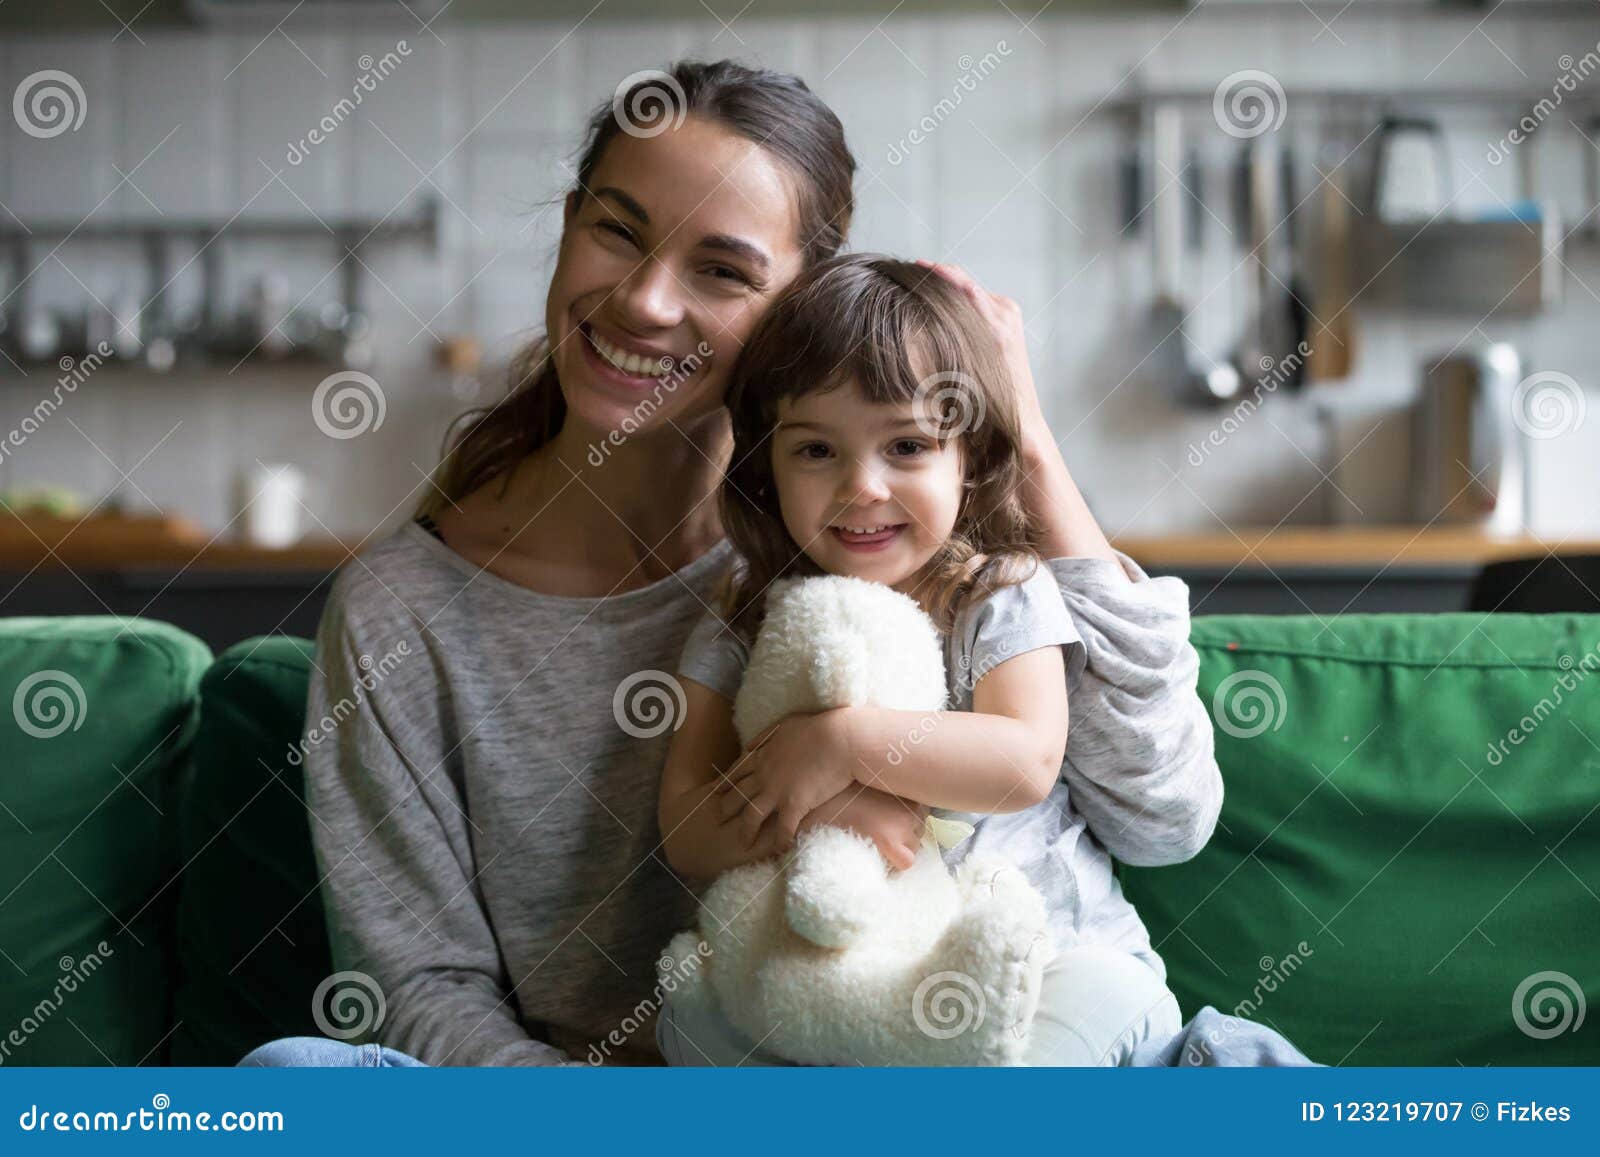 portrait of happy family single mother and kid daughter embracin